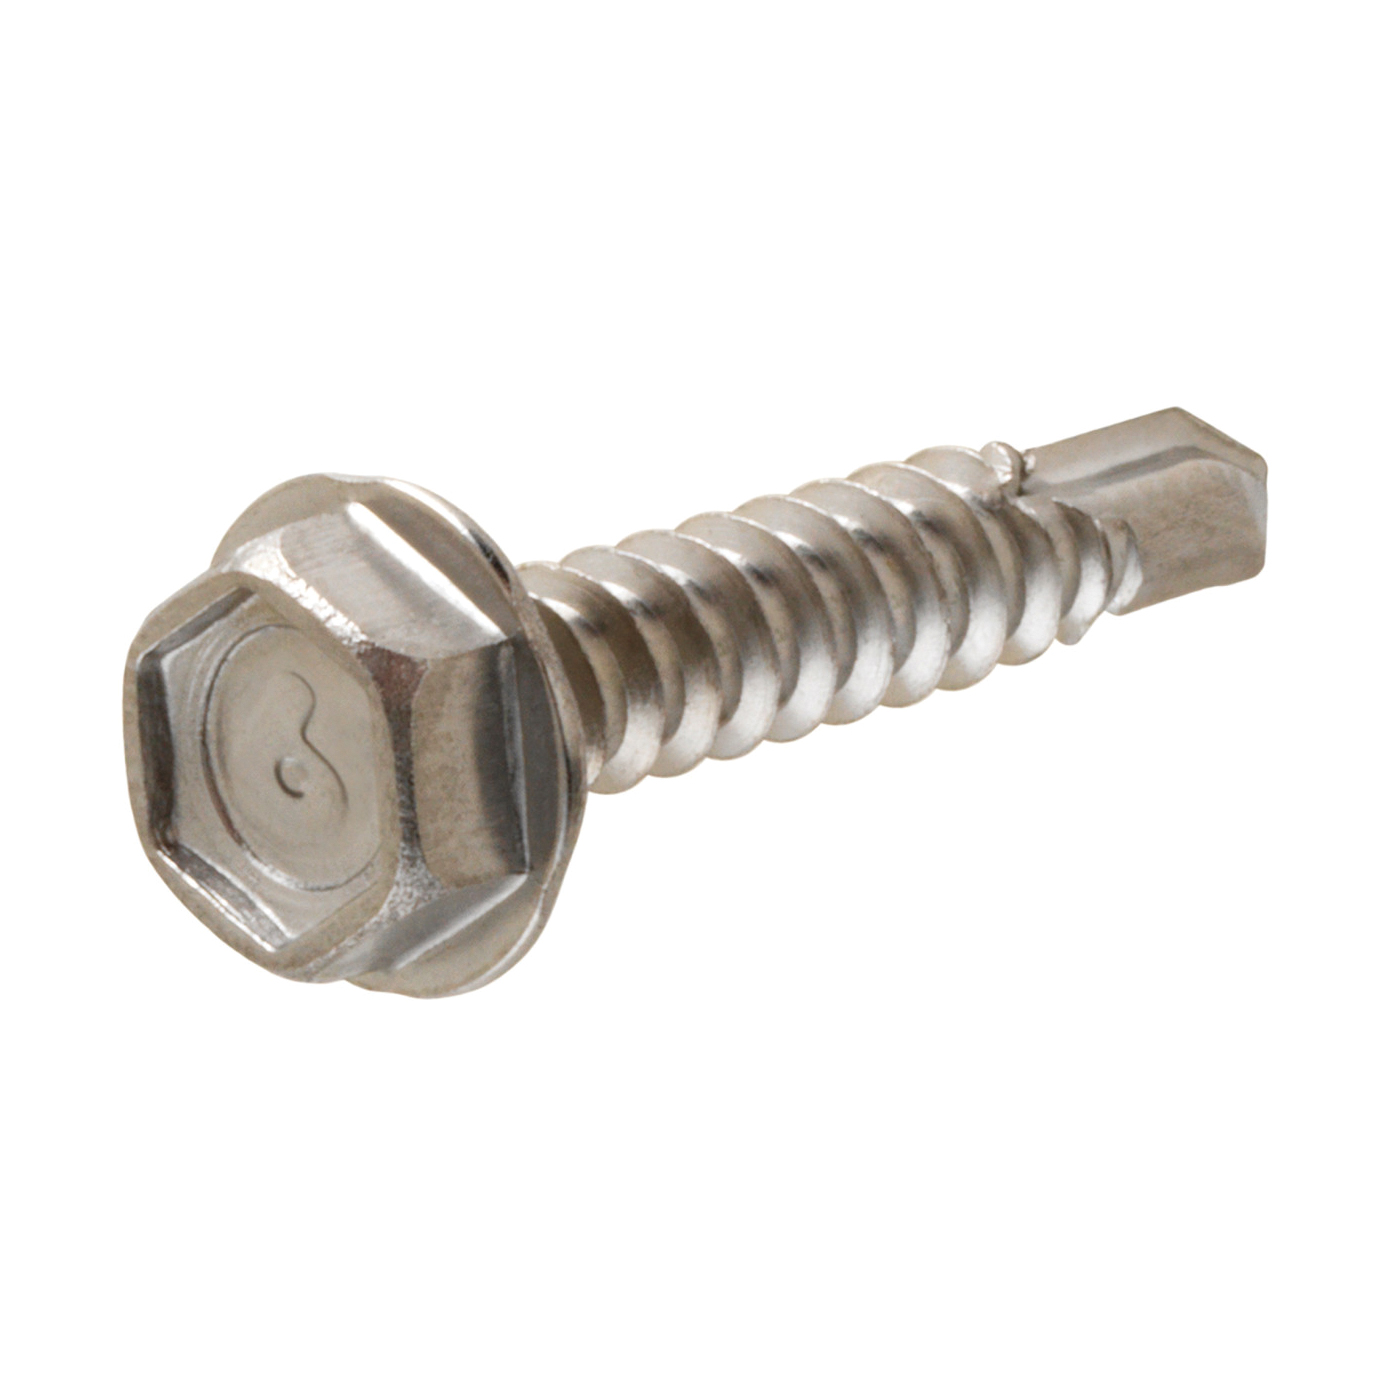 881838 Screw, #10 Thread, 1 in L, Coarse Thread, Washer Head, Hex Drive, Self-Drilling Point, Stainless Steel